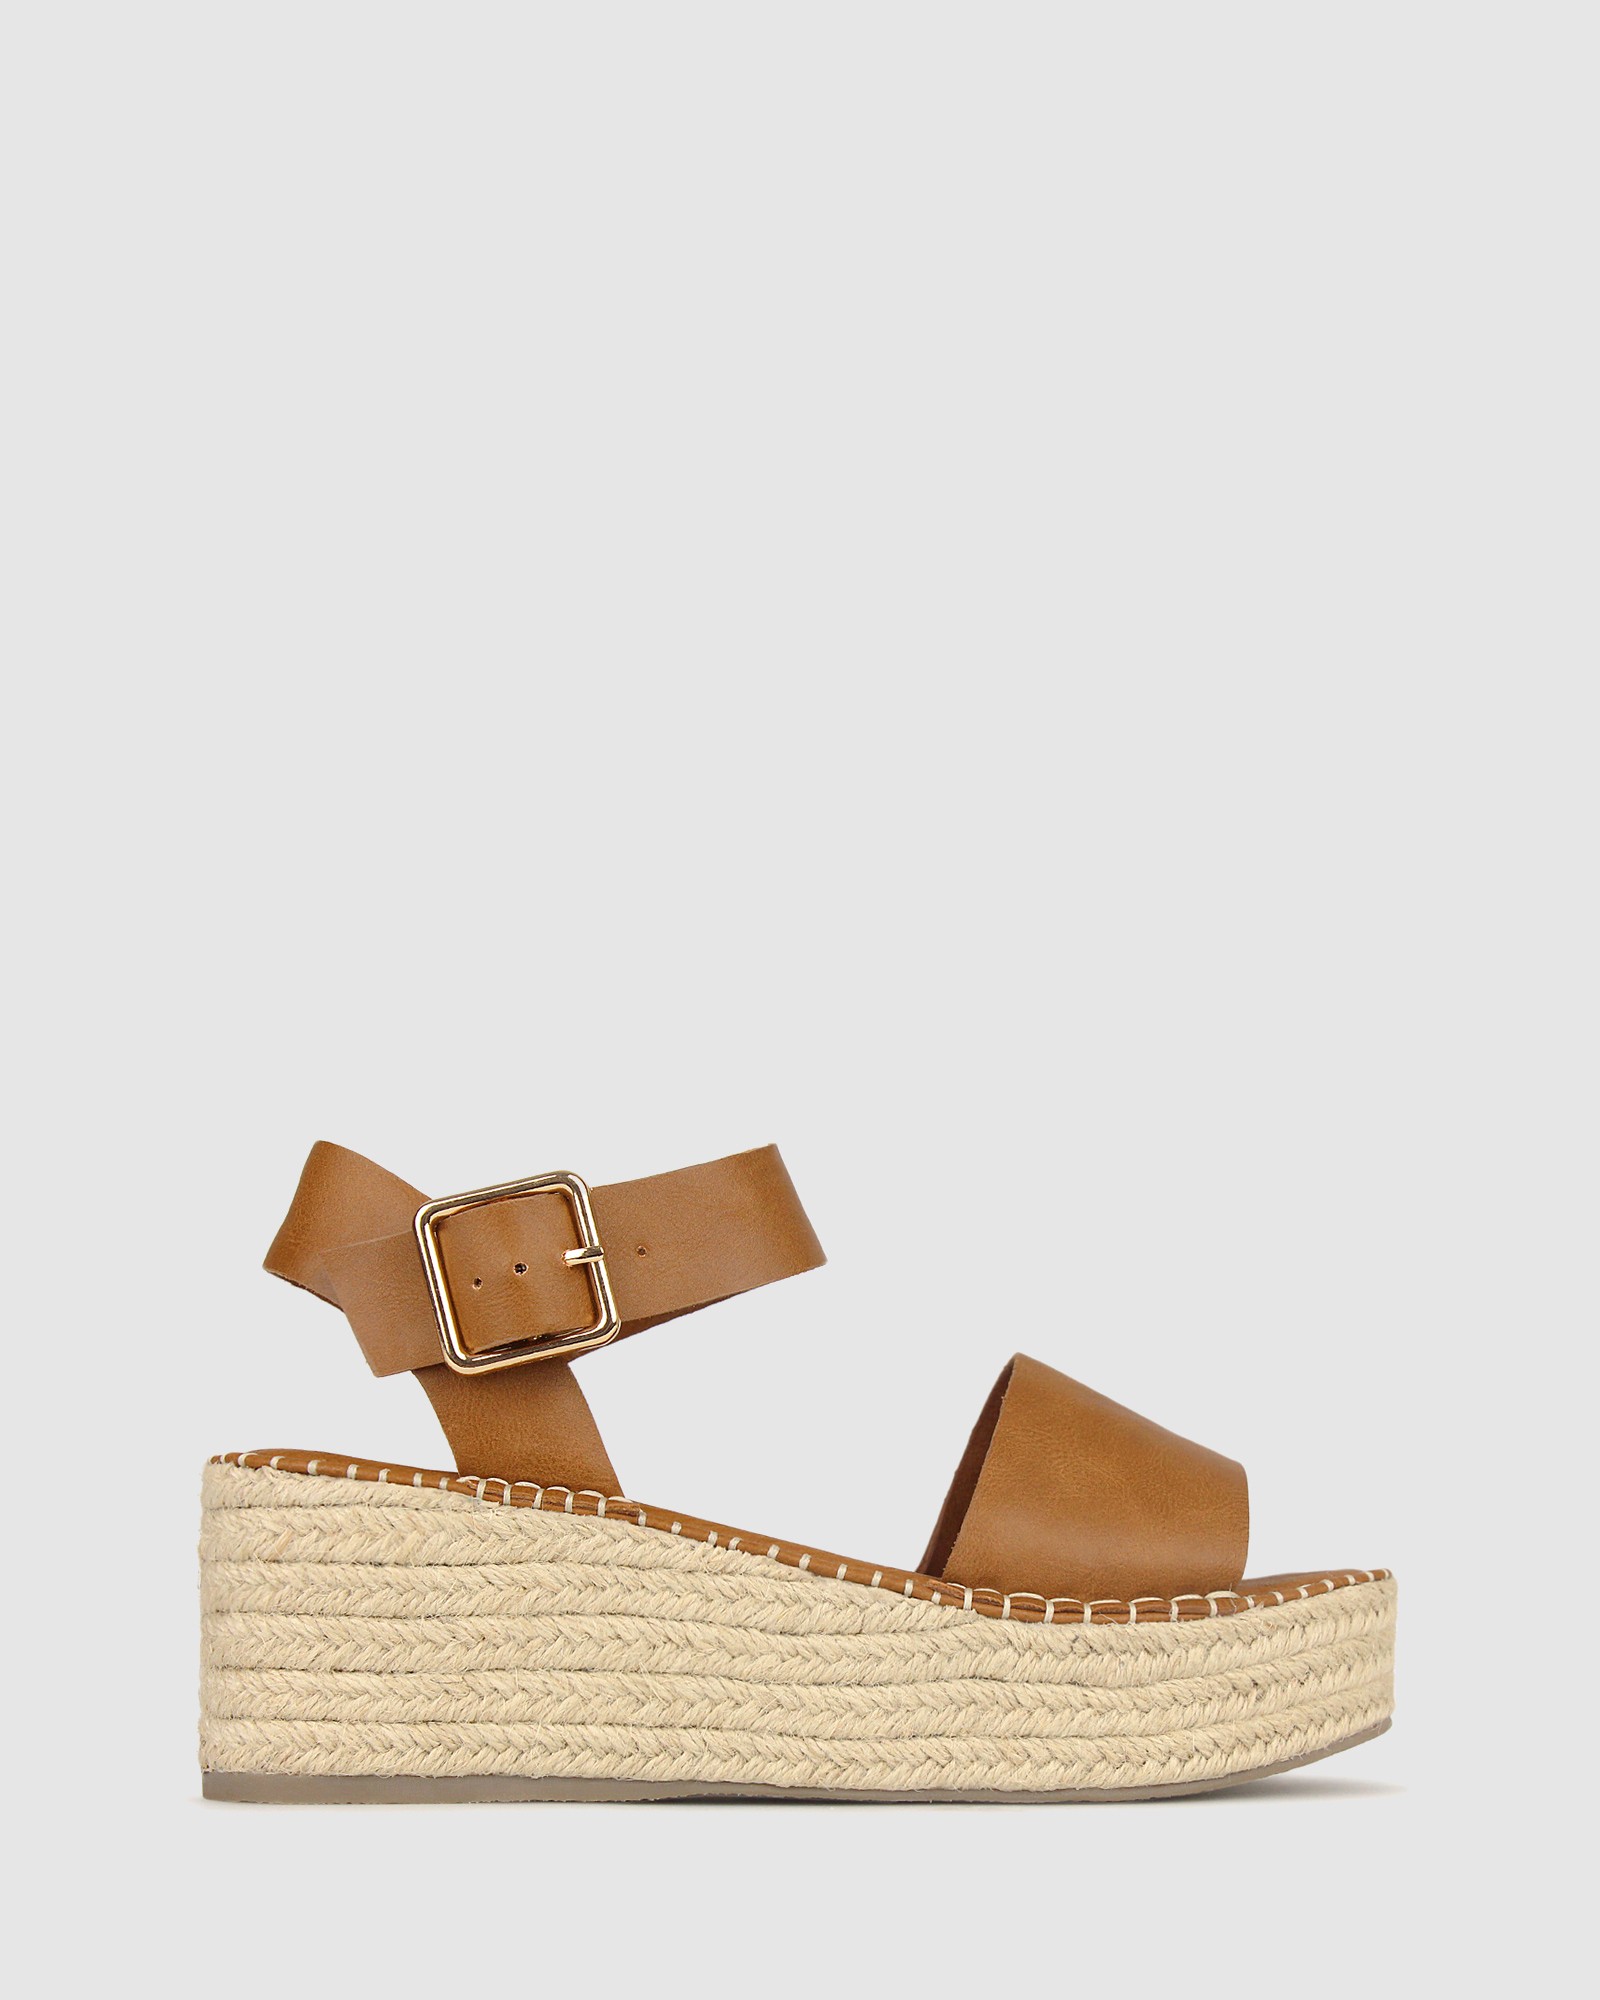 Bali Rope Flatform Sandals Tan by Betts | ShoeSales